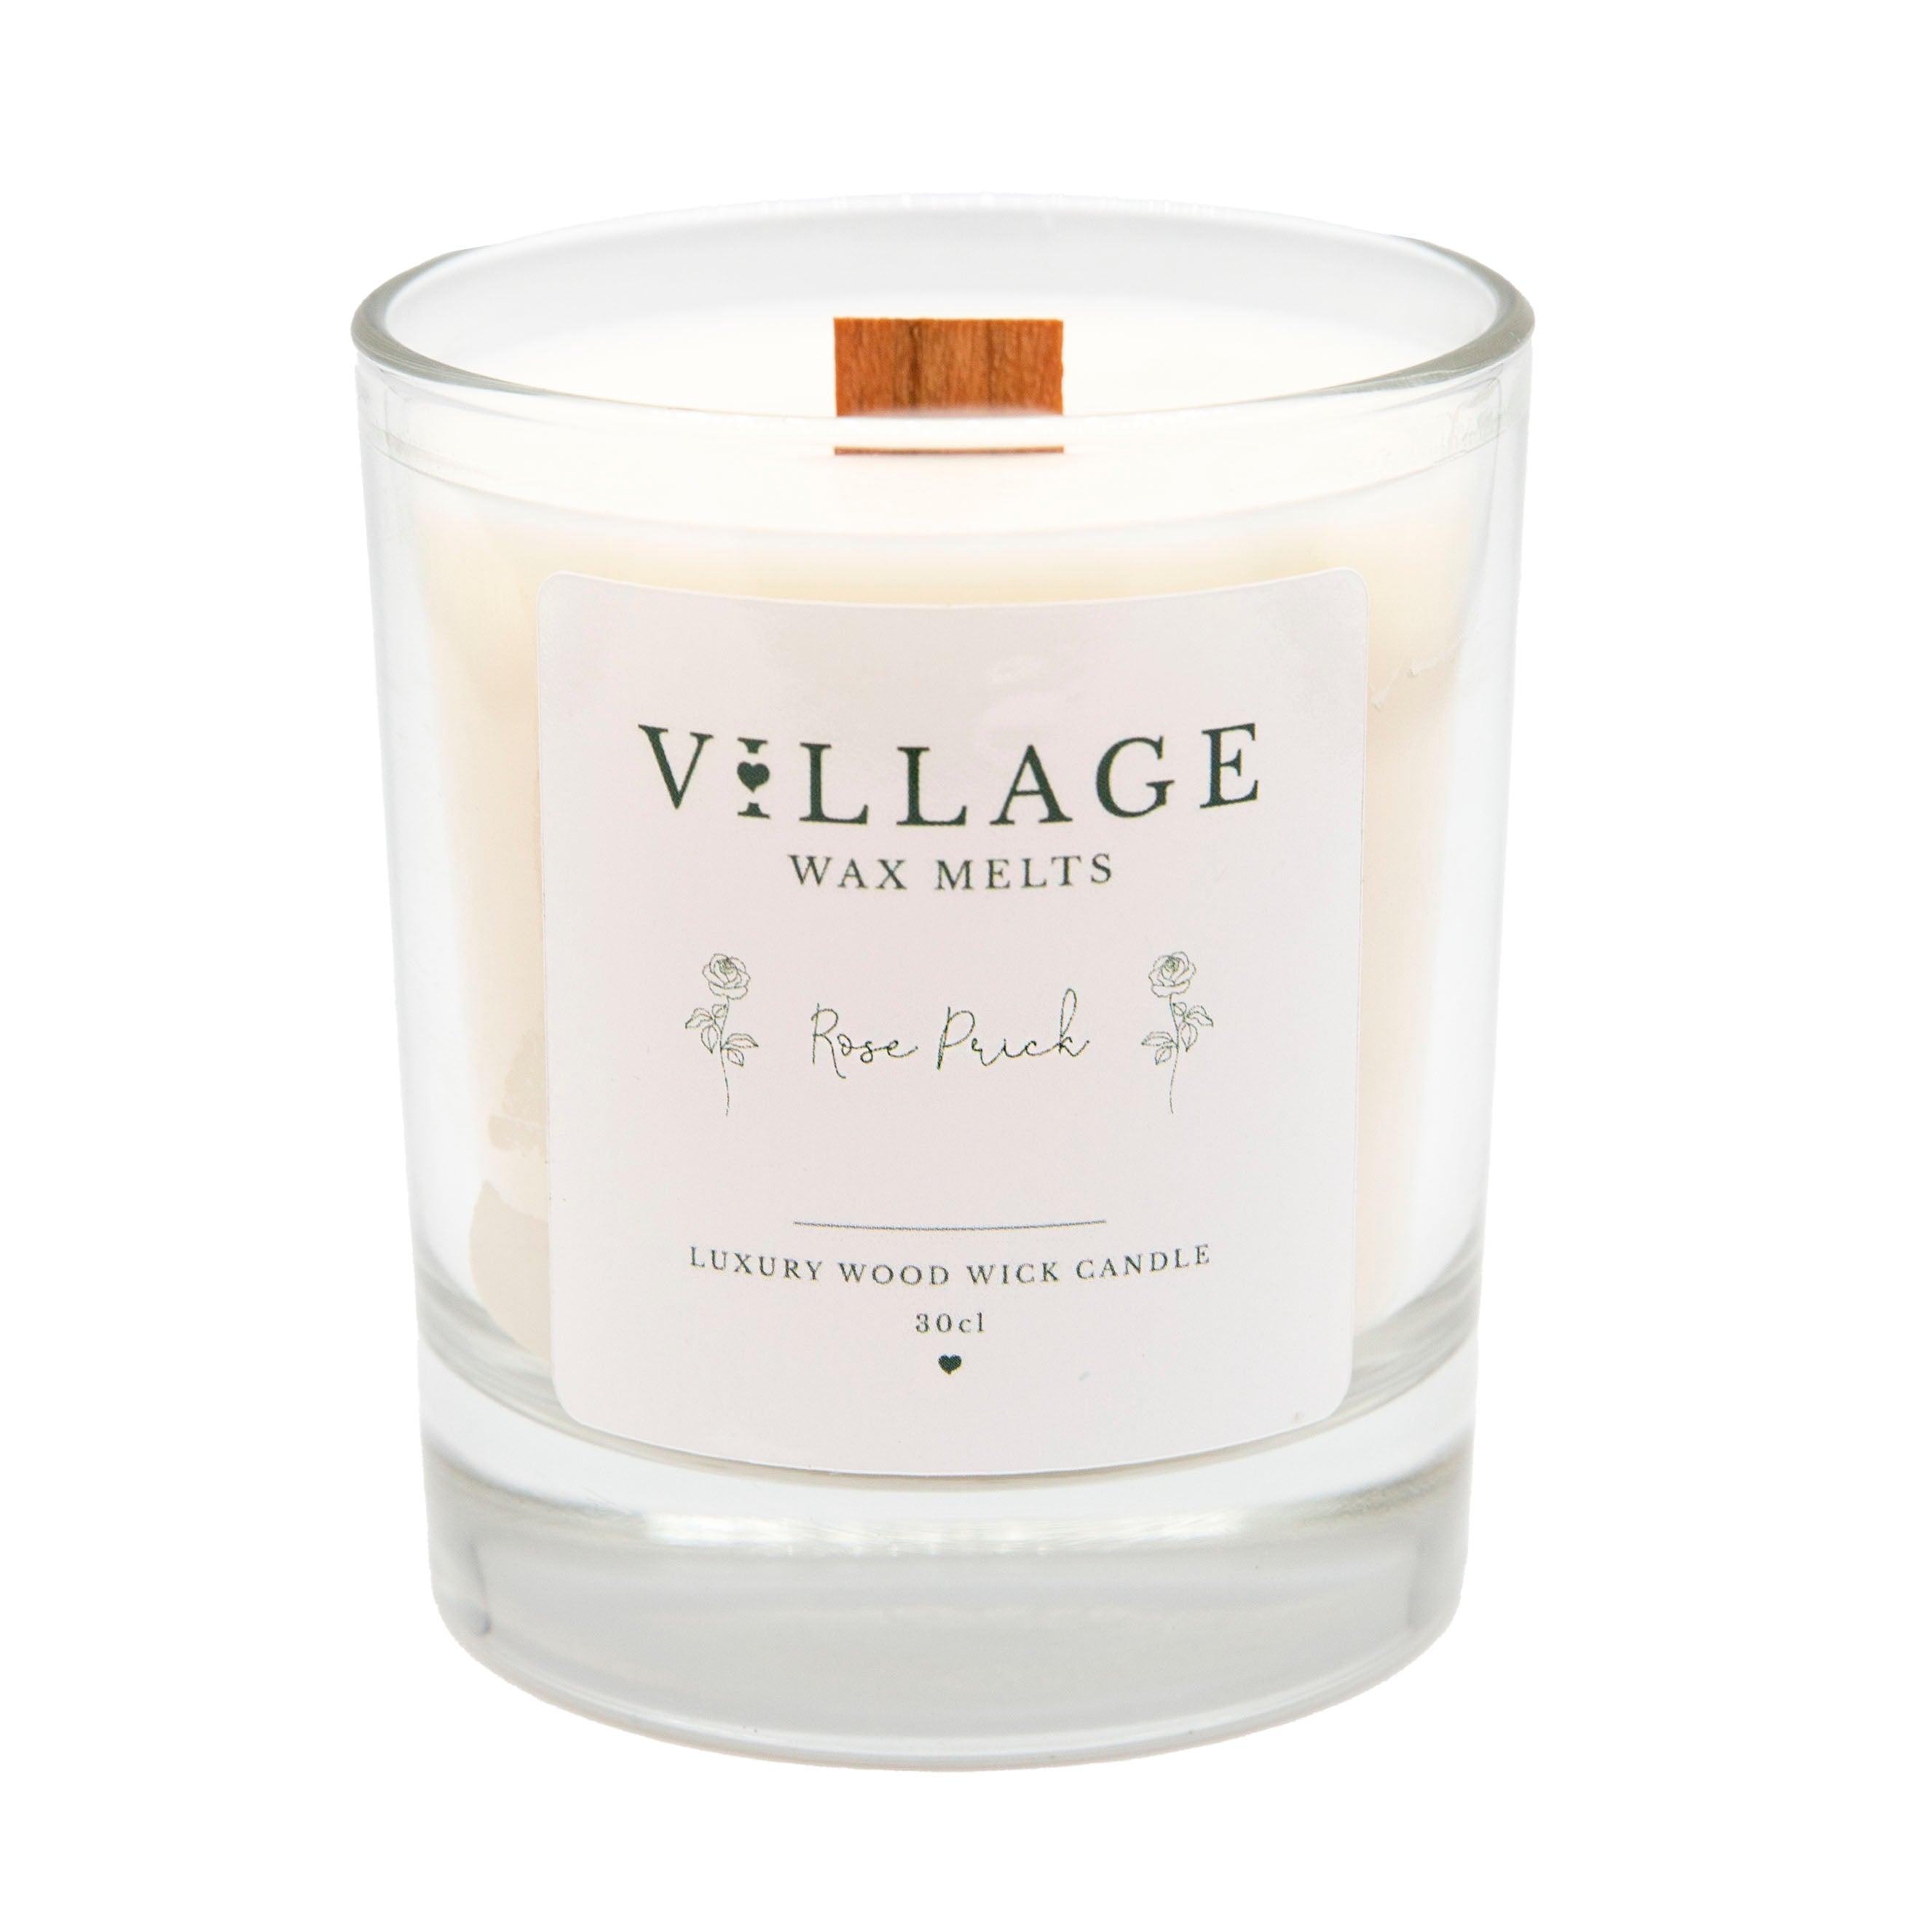 Rose Prick Wood Wick Candle 30cl – Village Wax Melts